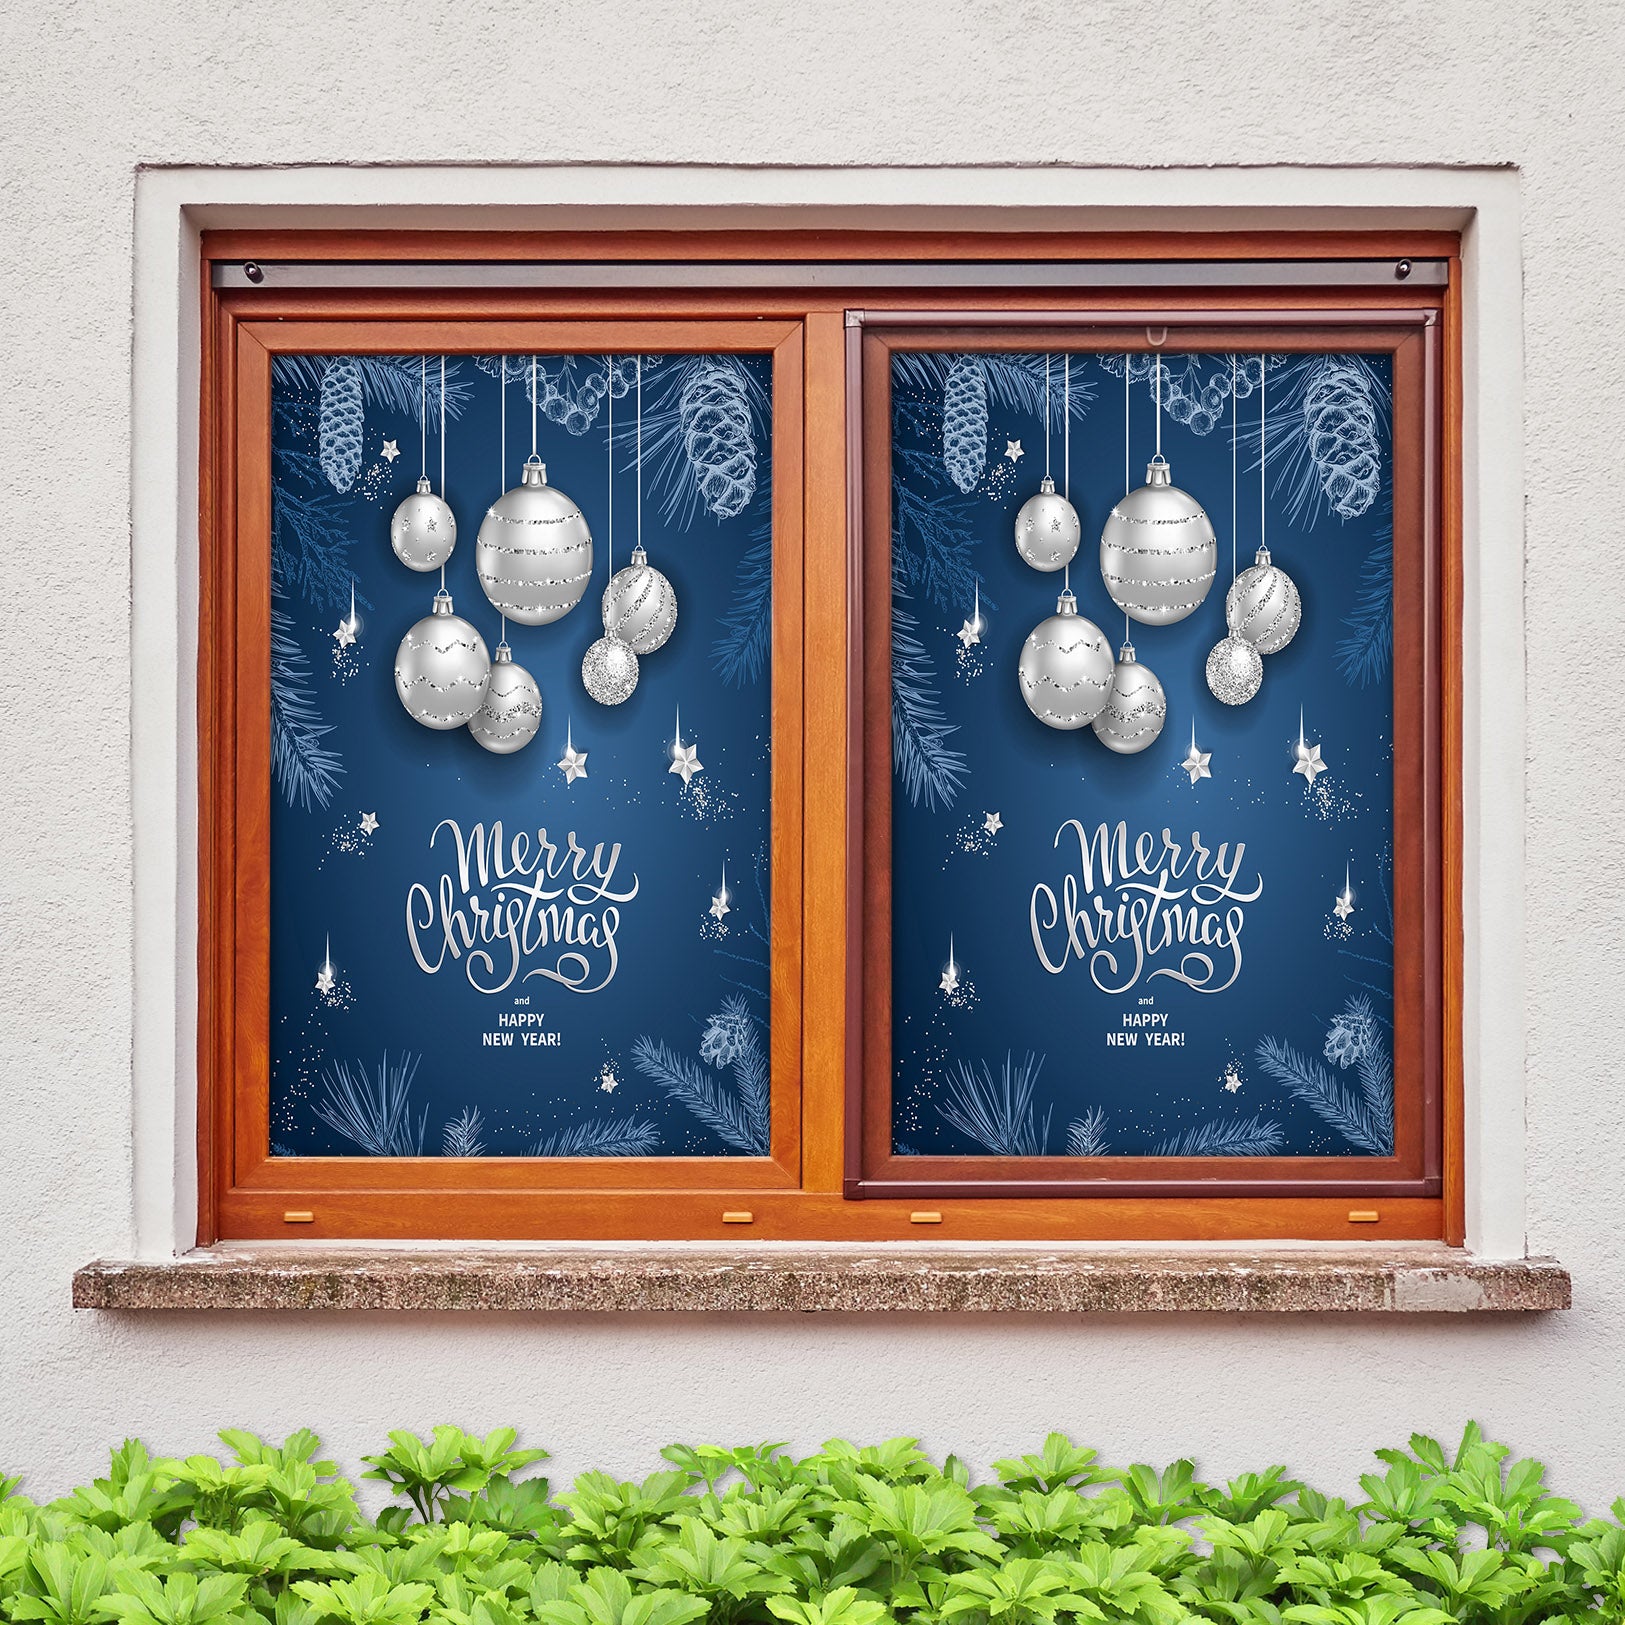 3D Merry Christmas 43027 Christmas Window Film Print Sticker Cling Stained Glass Xmas